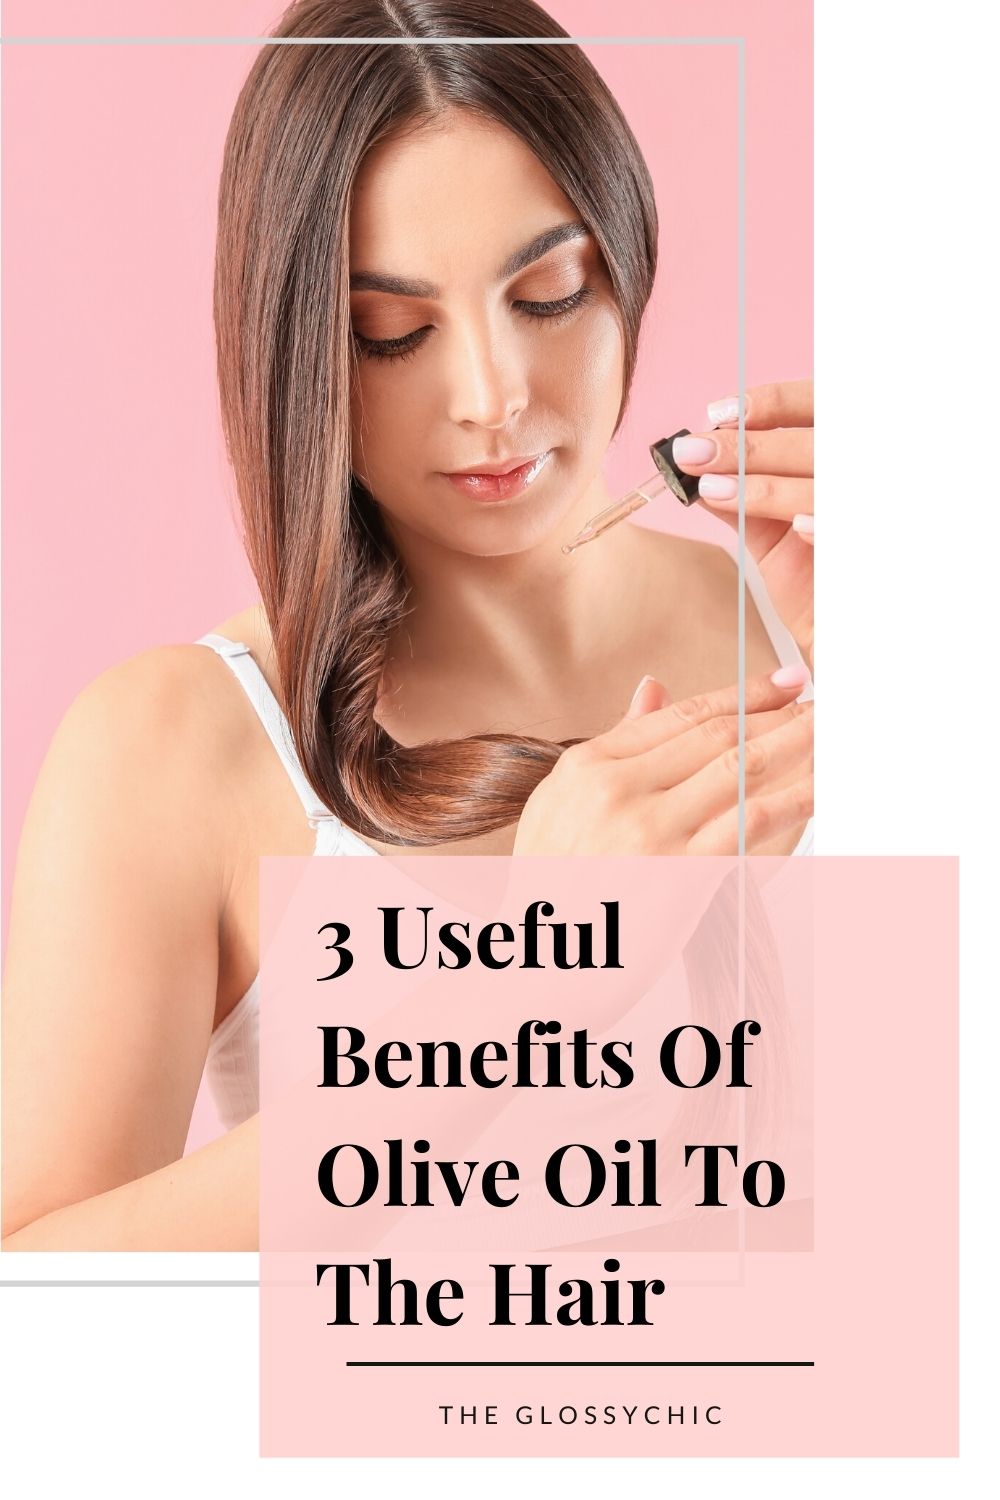 3 Useful Benefits Of Olive Oil To The Hair
